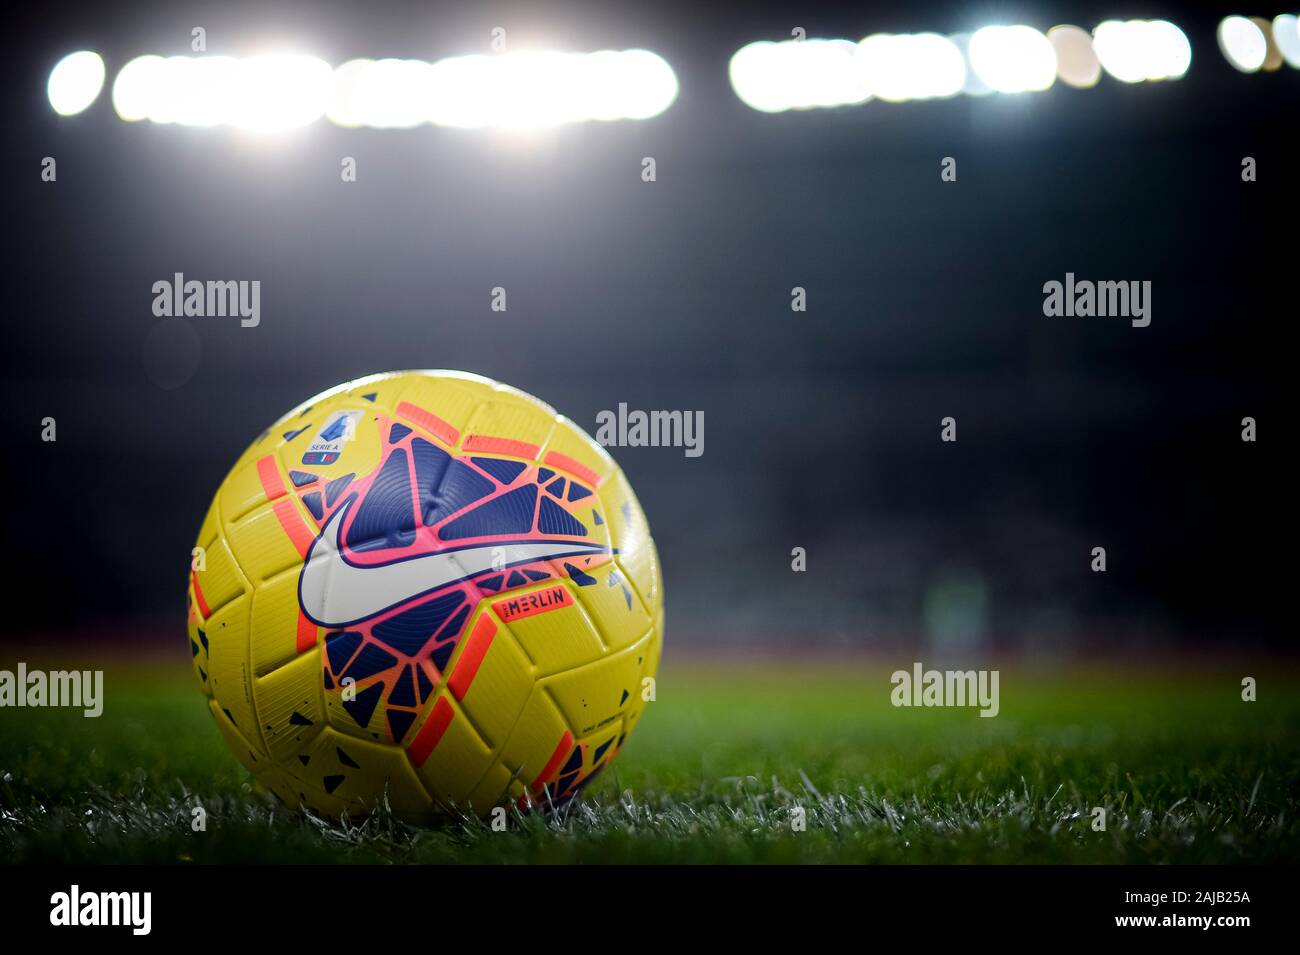 Turin, Italy - 21 December, 2019: Nike Merlin Hi-Vis, official Serie A  match ball, is seen during the Serie A football match between Torino FC and  SPAL. SPAL won 2-1 over Torino